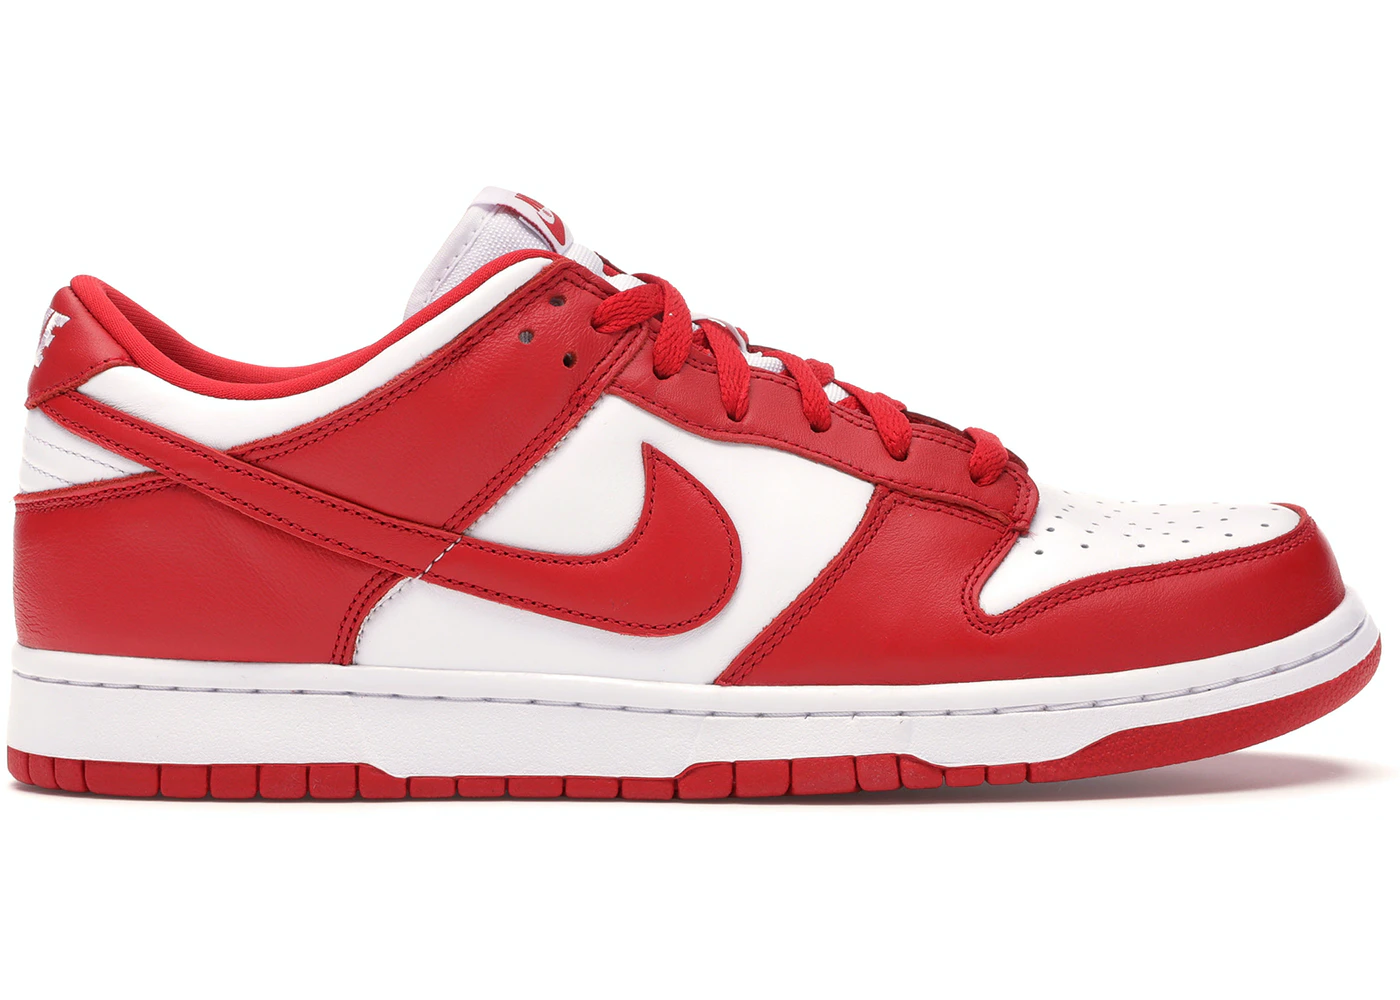 Dunk Low University Red (2020)